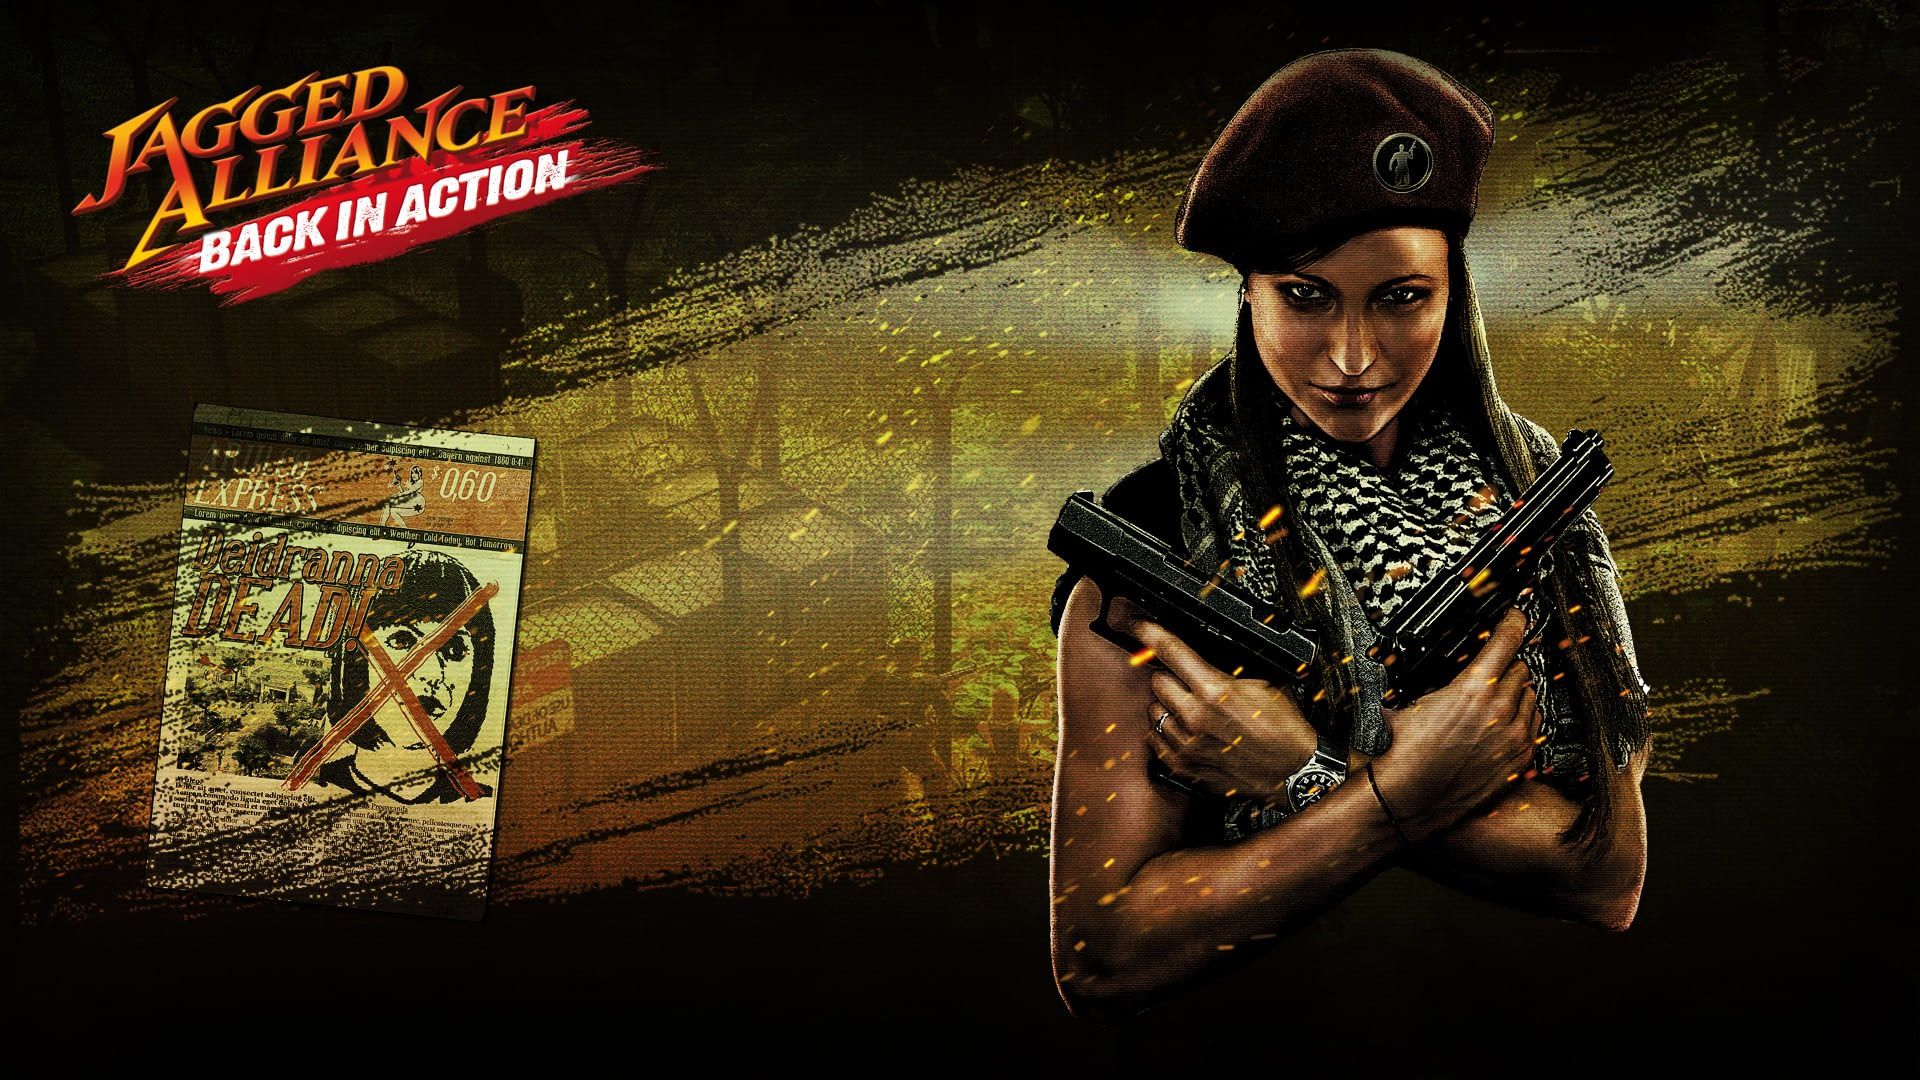 Get back in action with these Jagged Alliance wallpaper